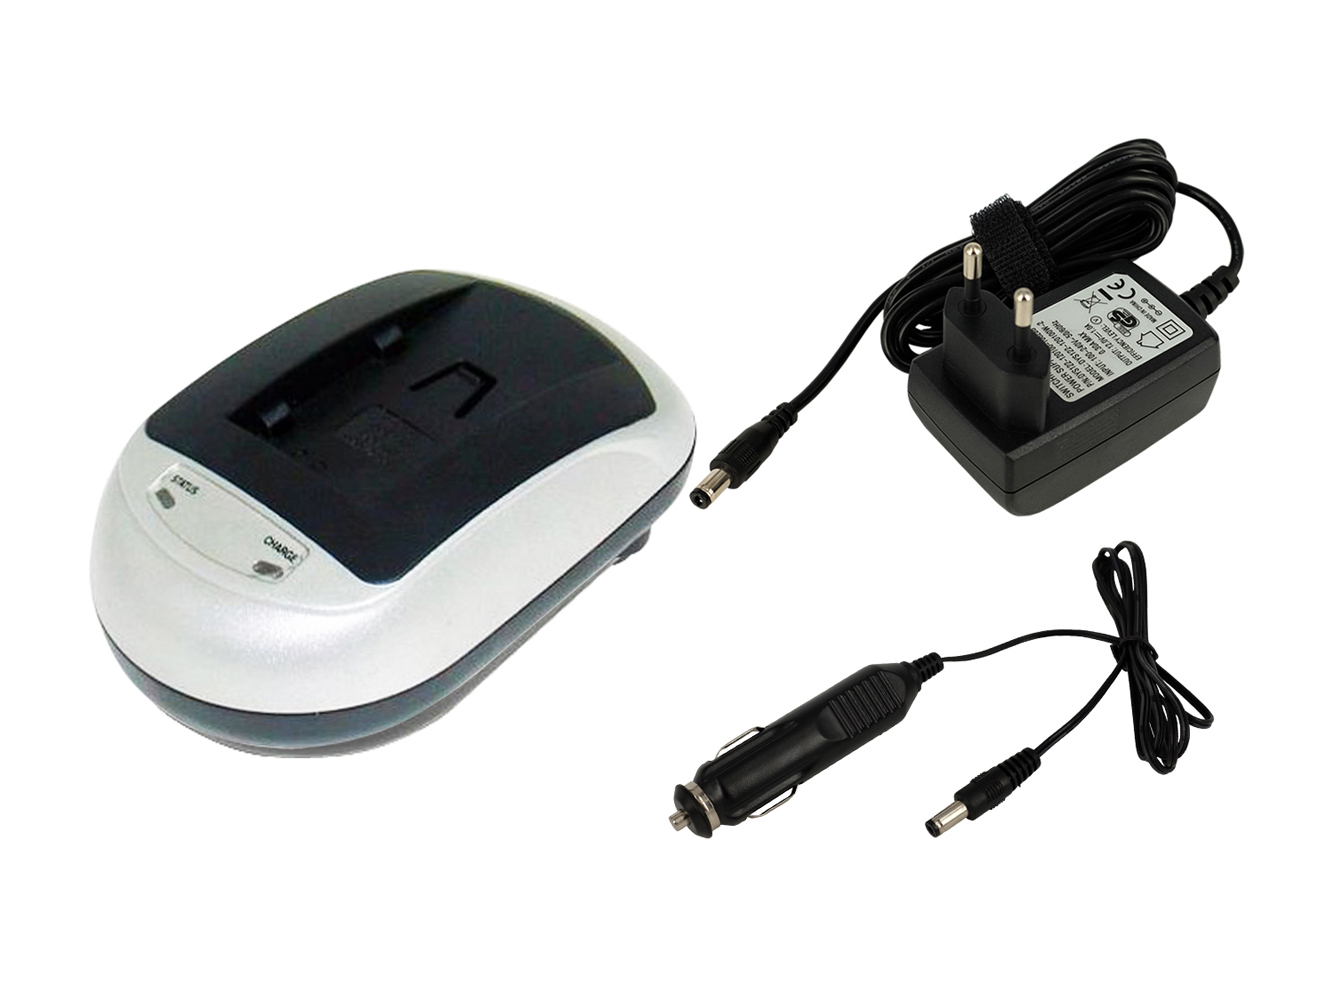 Canon Bp-807, Bp-808d Battery Chargers For Fs30, Fs300 replacement